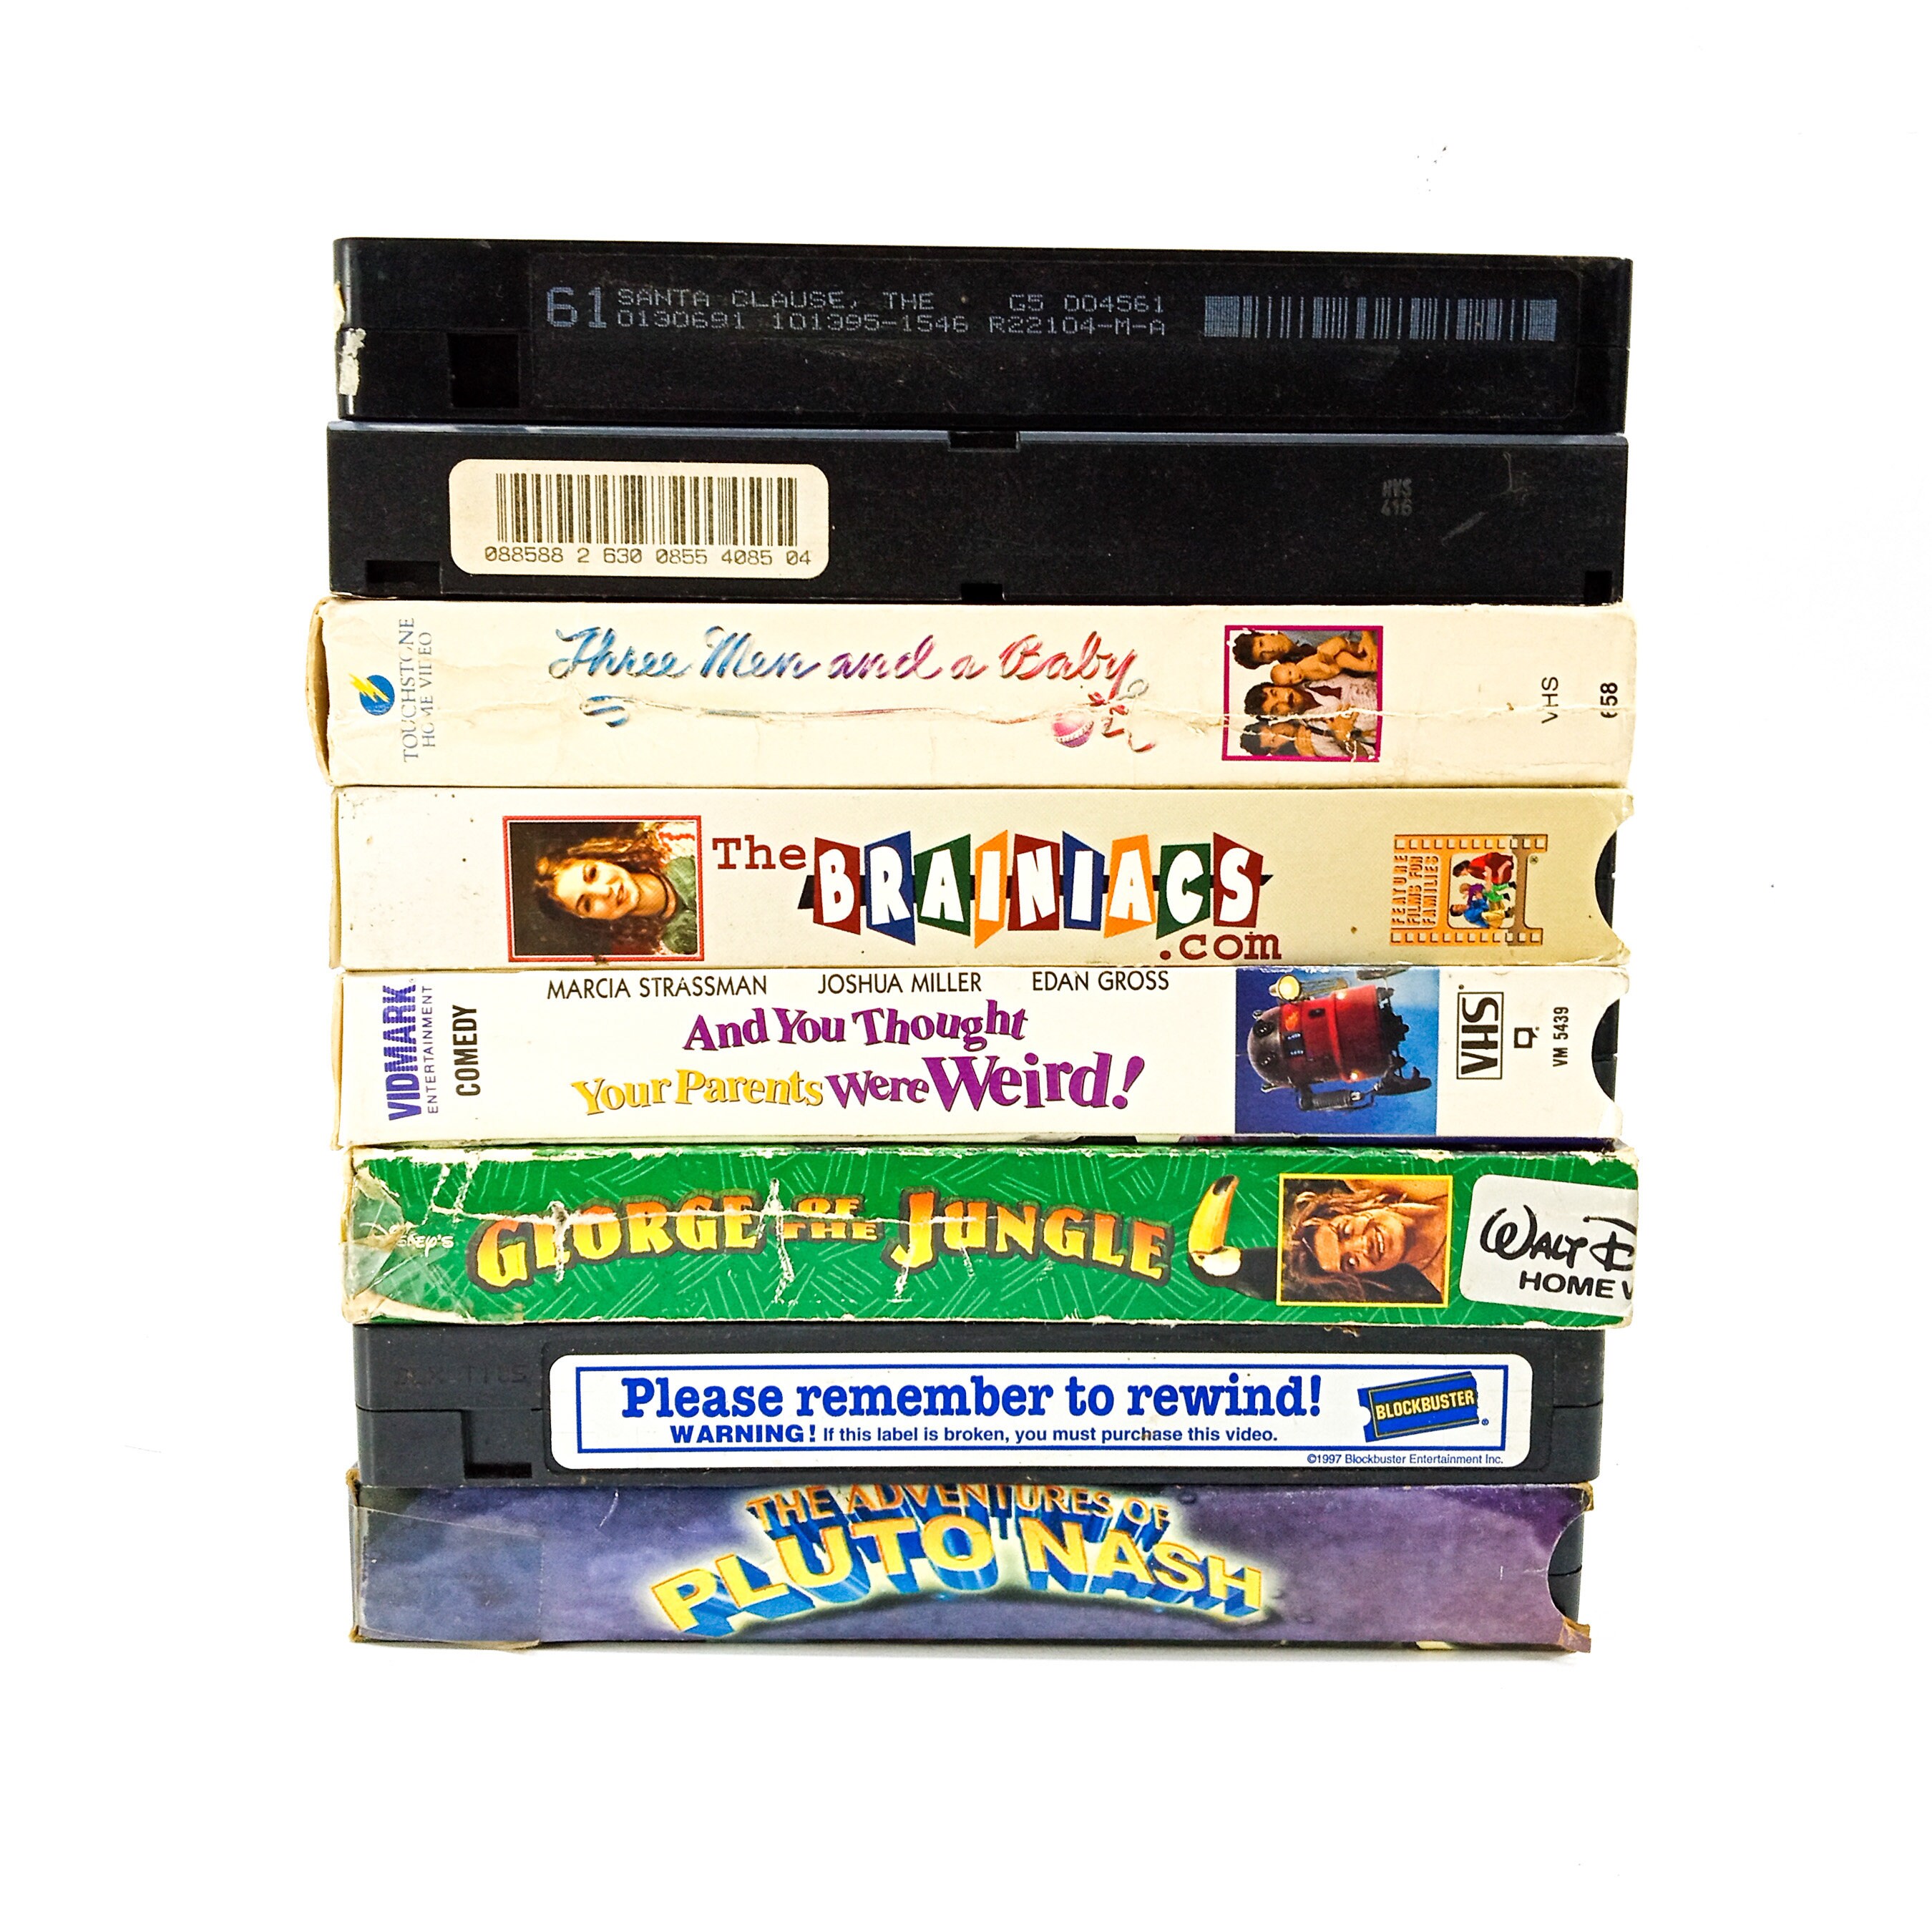 Comedy Vhs Tape